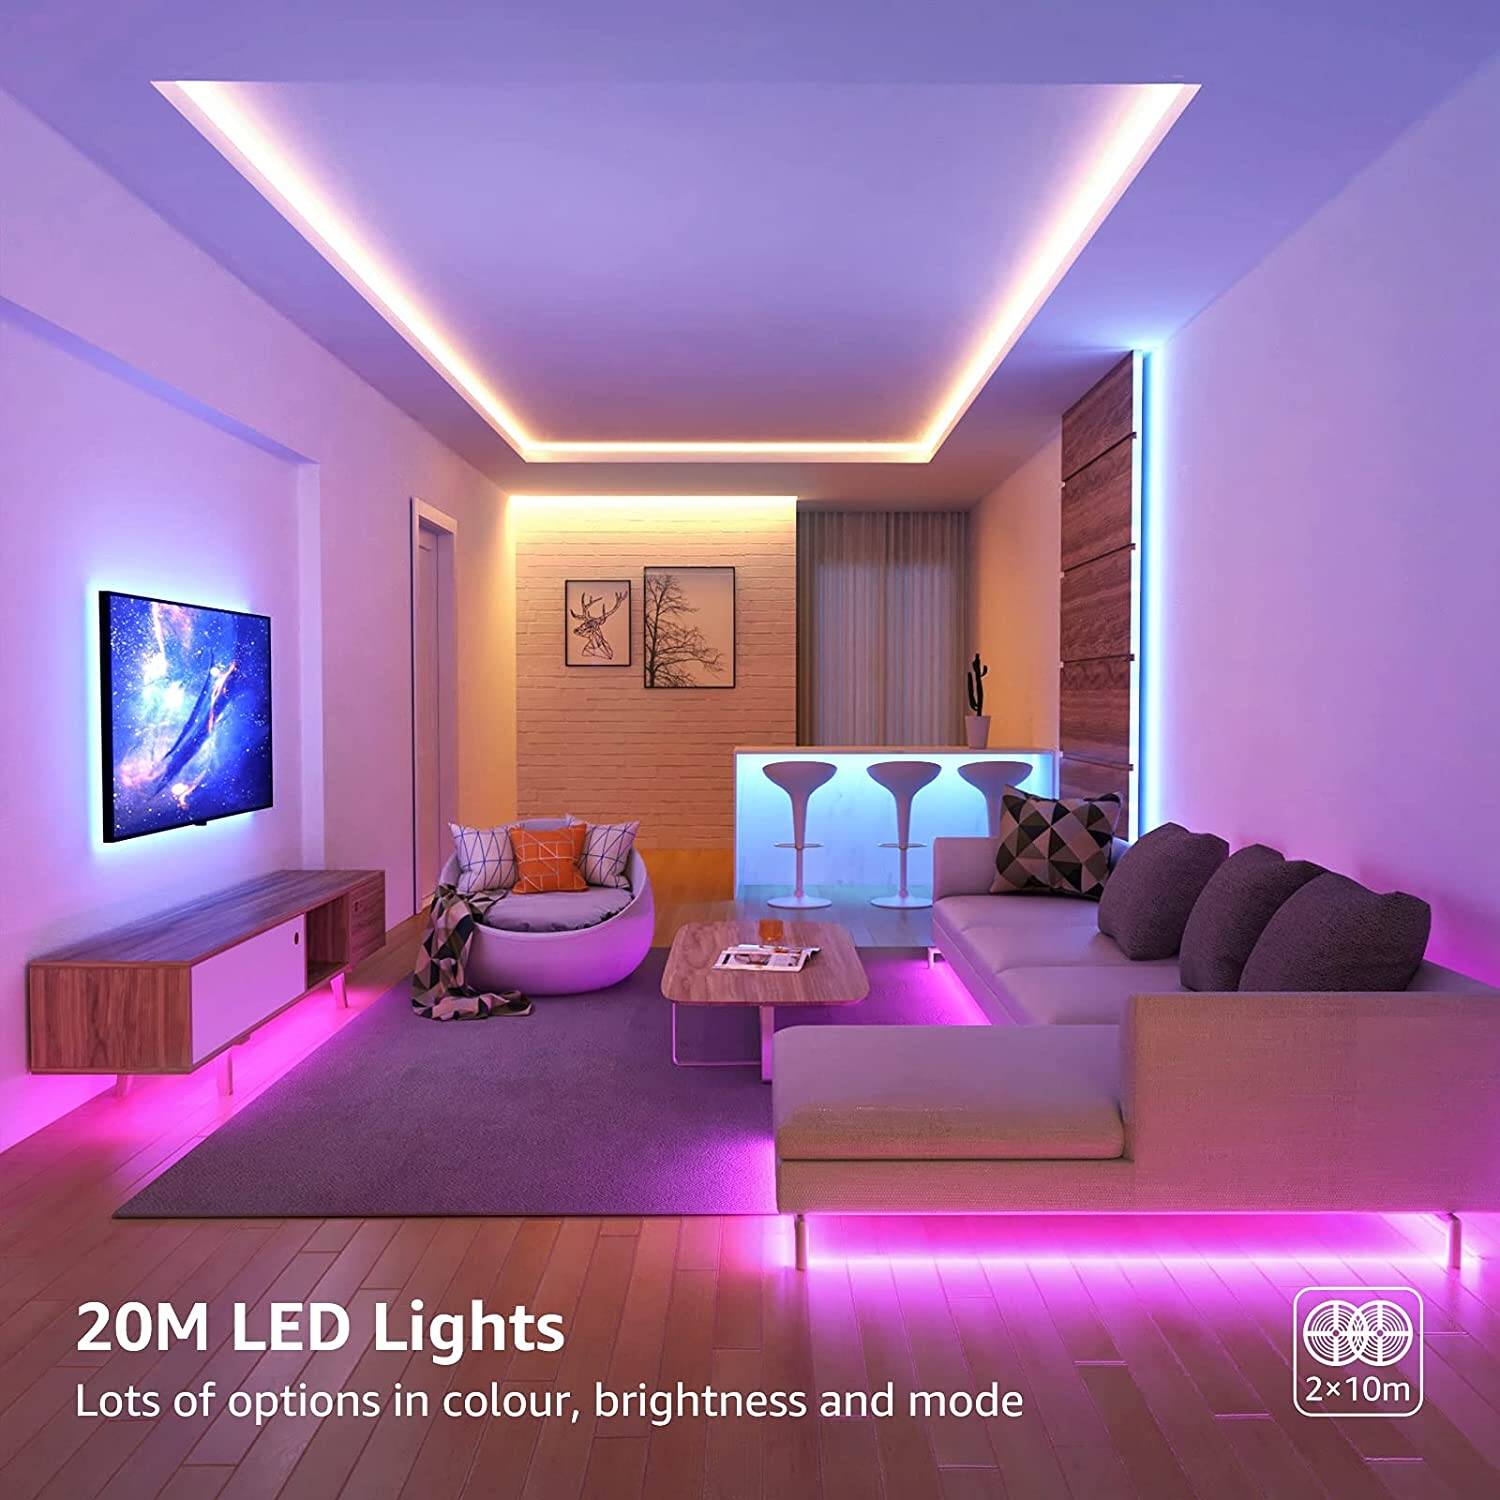 Lepro 20M LED Strip Lights with Remote, RGB Colour Changing, Dimmable Strip  Lighting, Long Plug in LED Lights for Bedroom, Kitchen, Daughters Room (2 x  10M, Stick on, 600 Bright 5050 LEDs)